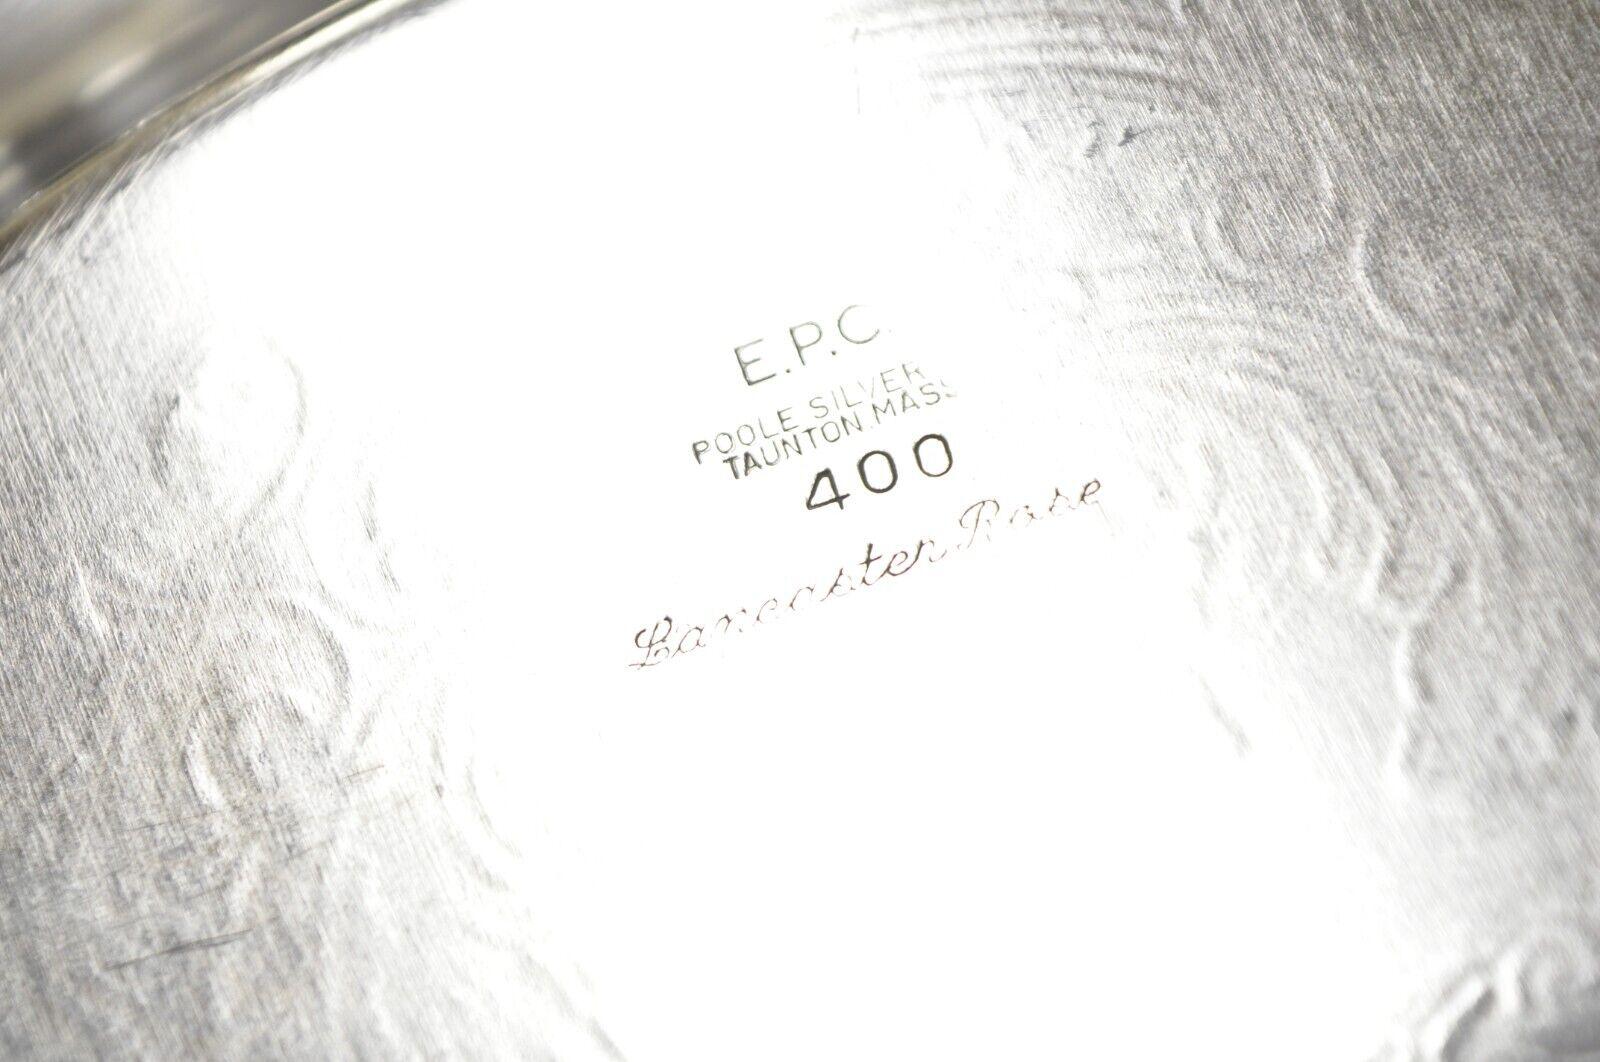 EPCA Poole Silver Co 400 Lancaster Rose Lrg Silver Plate Serving Platter Tray B For Sale 5